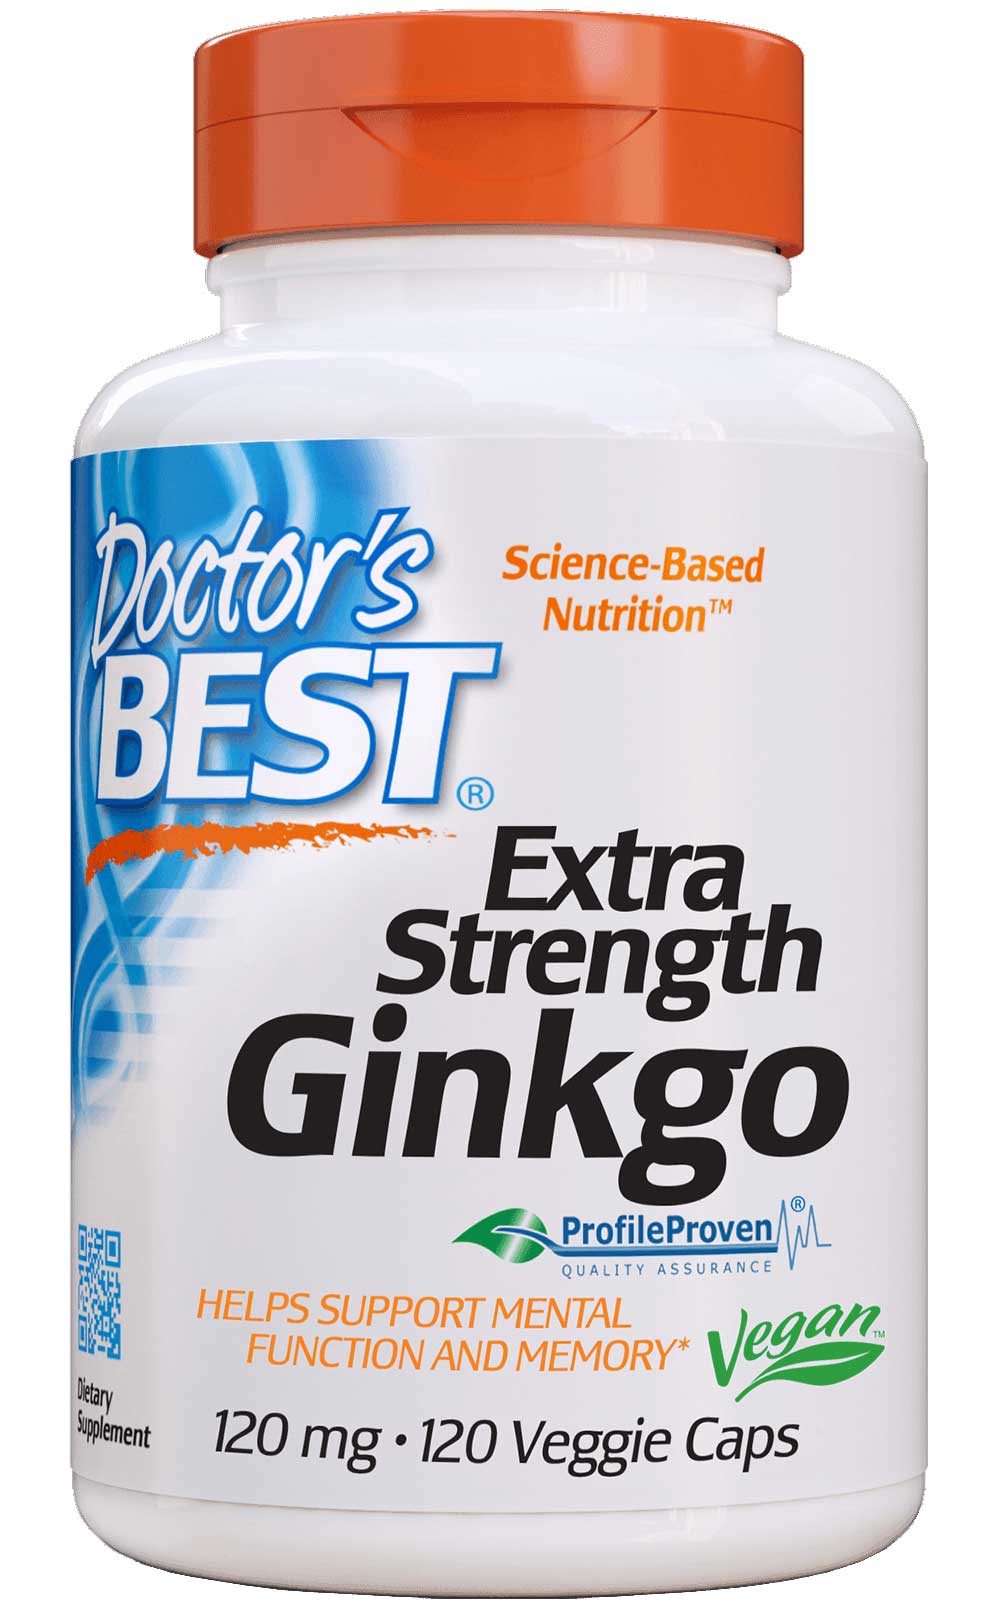 Doctor's Best Extra Strength Ginkgo 120 mg